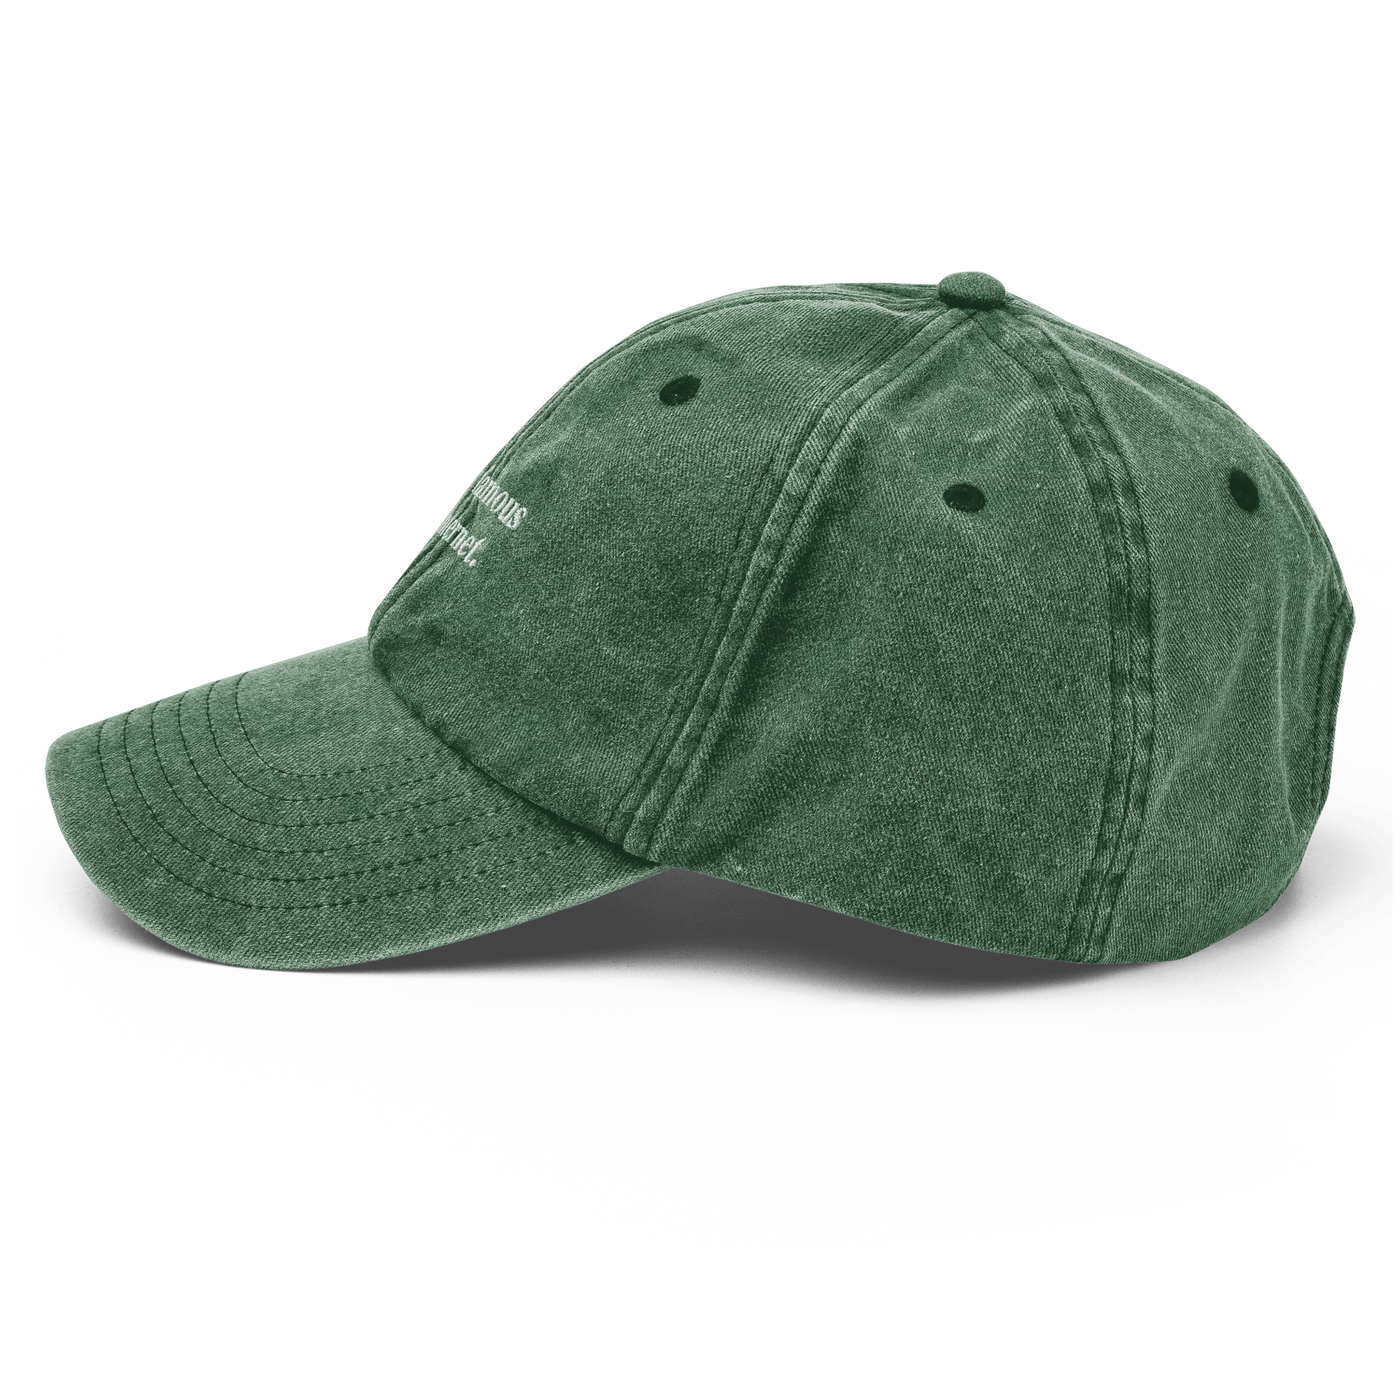 Very famous on internet Vintage Hat - Vintage Bottle Green - - Just Another Cap Store